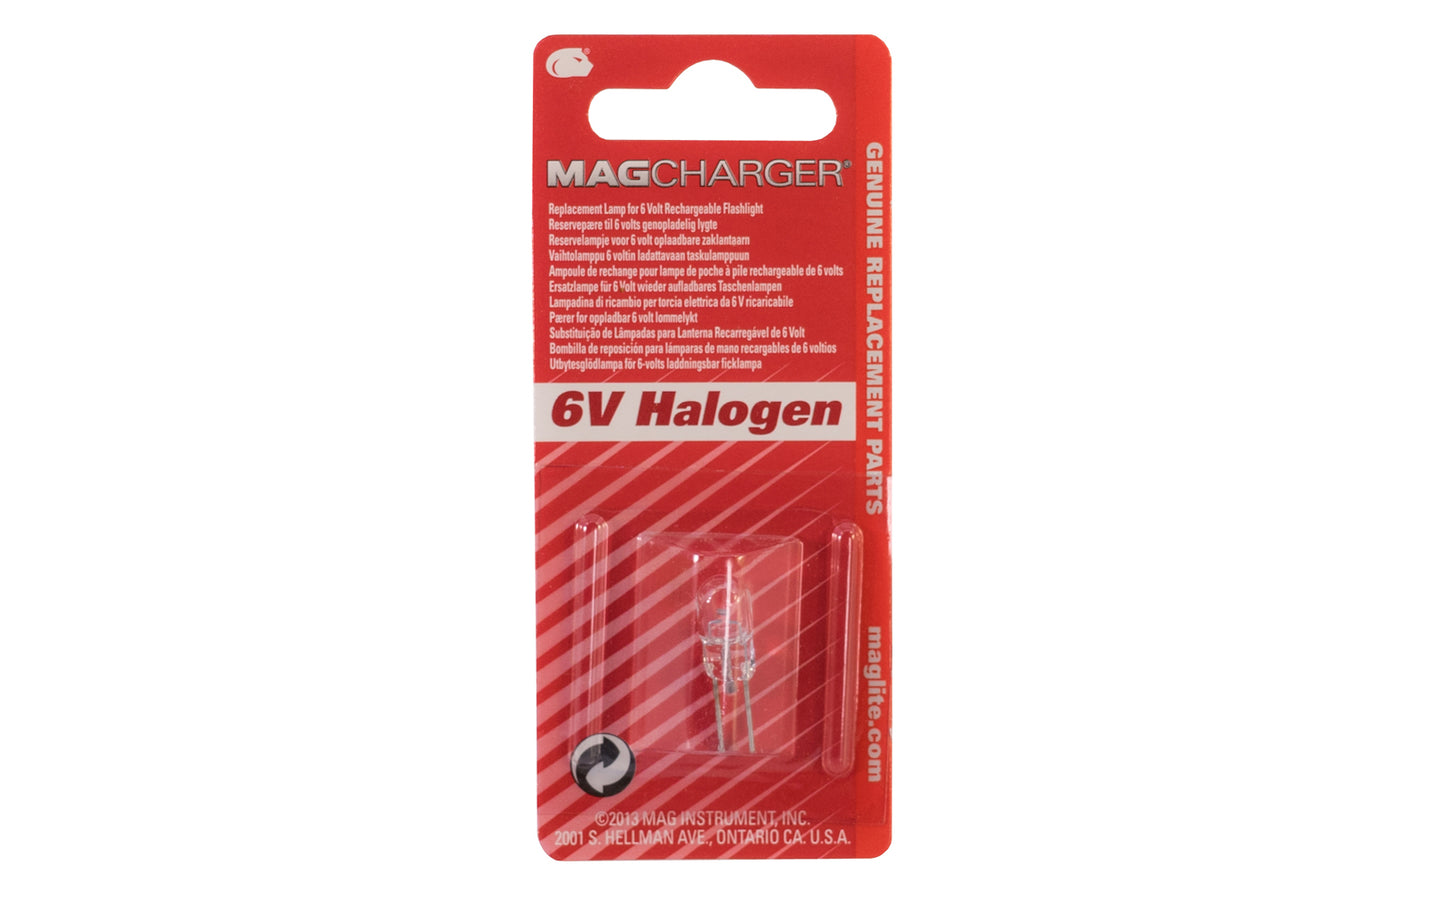 Maglite Replacement Lamp for 6V Rechargable Flashlight. Made in USA.